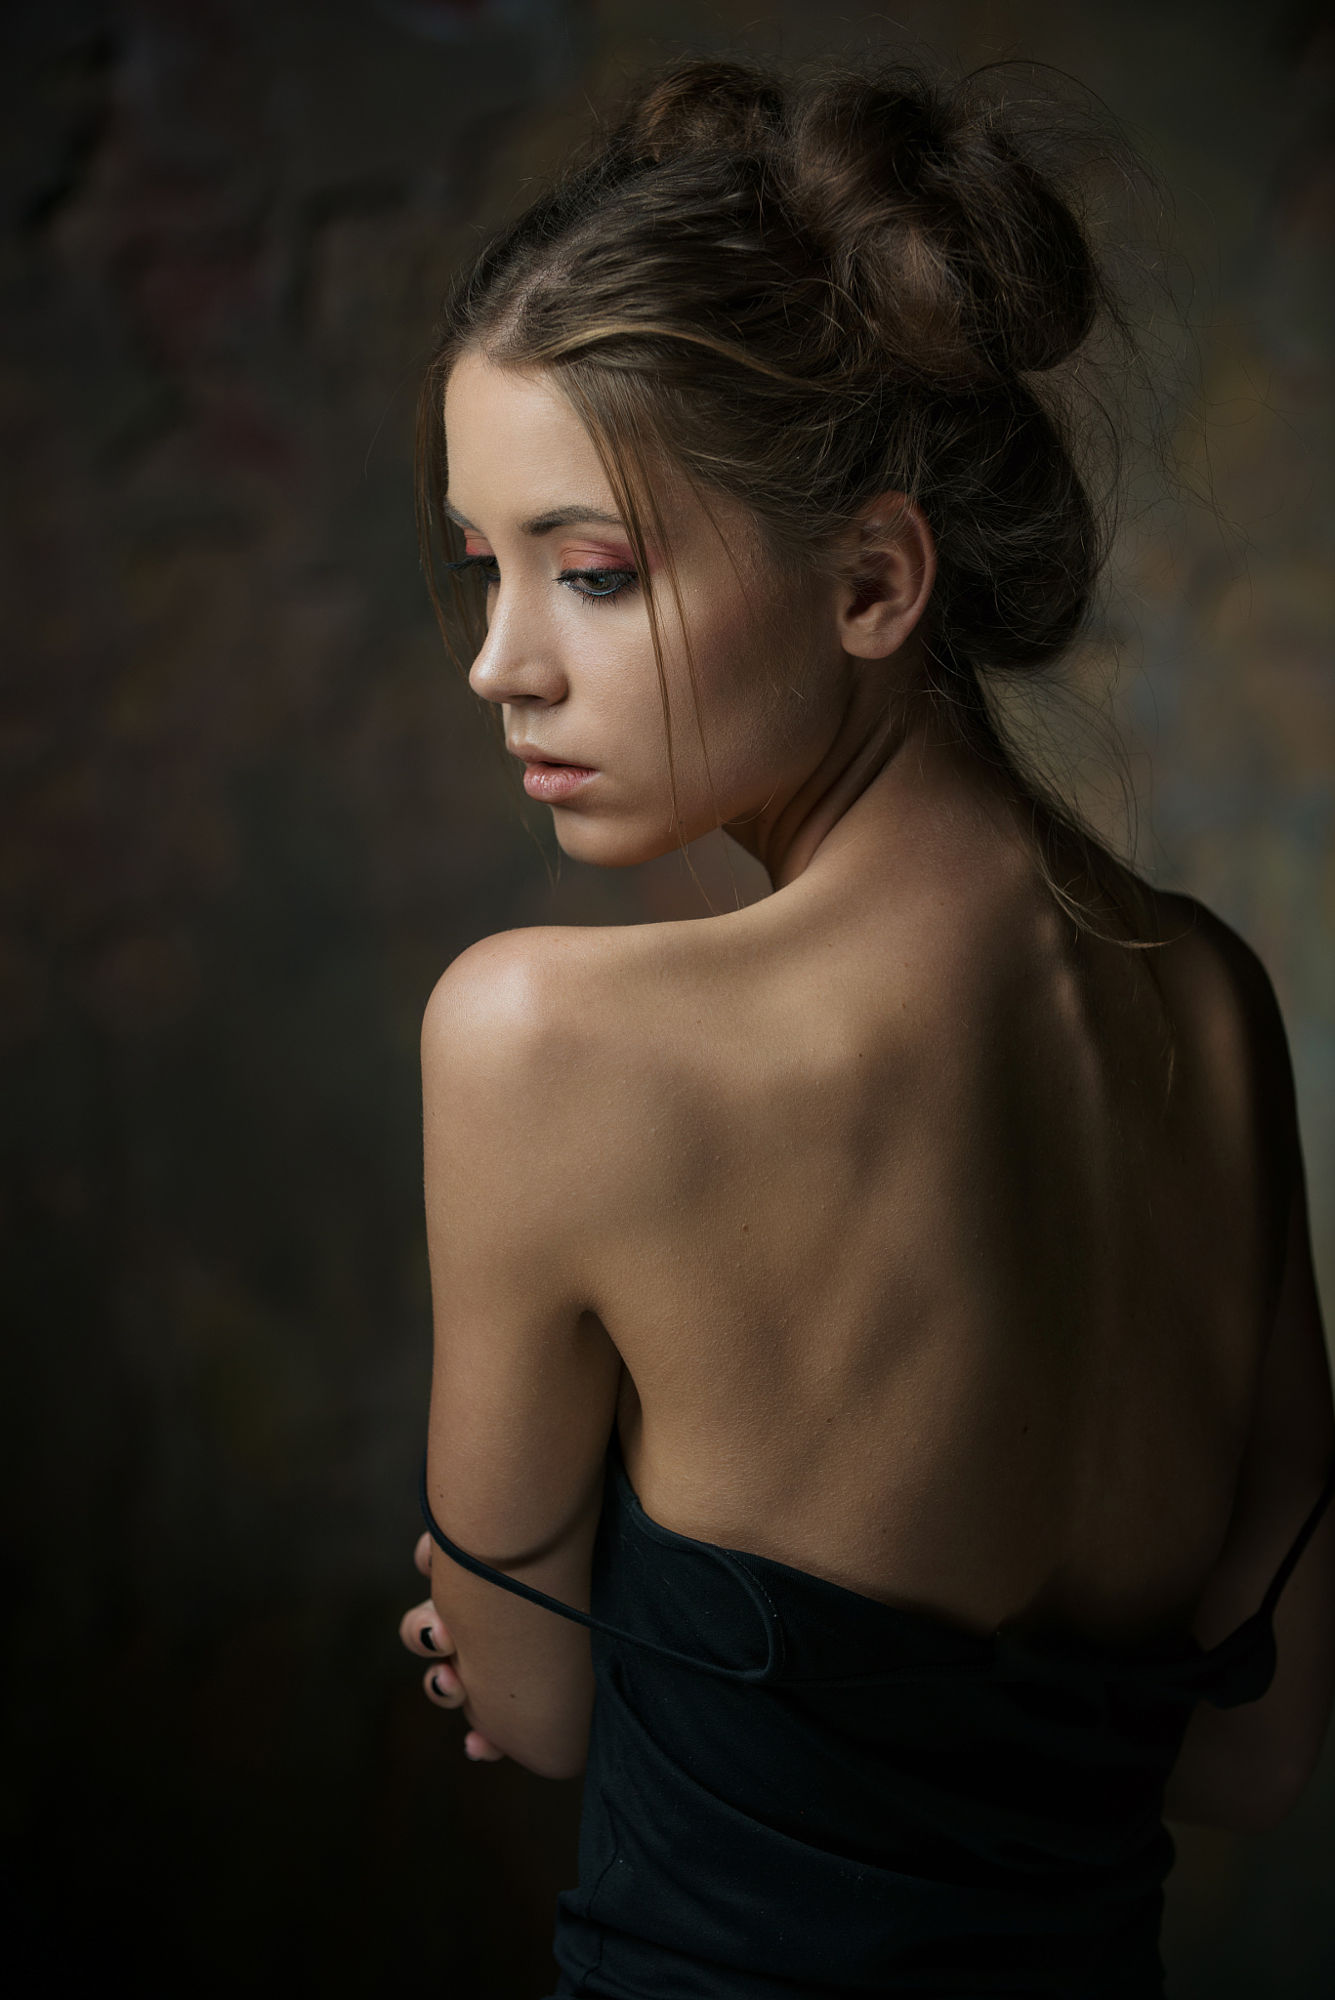 Images of Victoria Lukina | 1335x2000